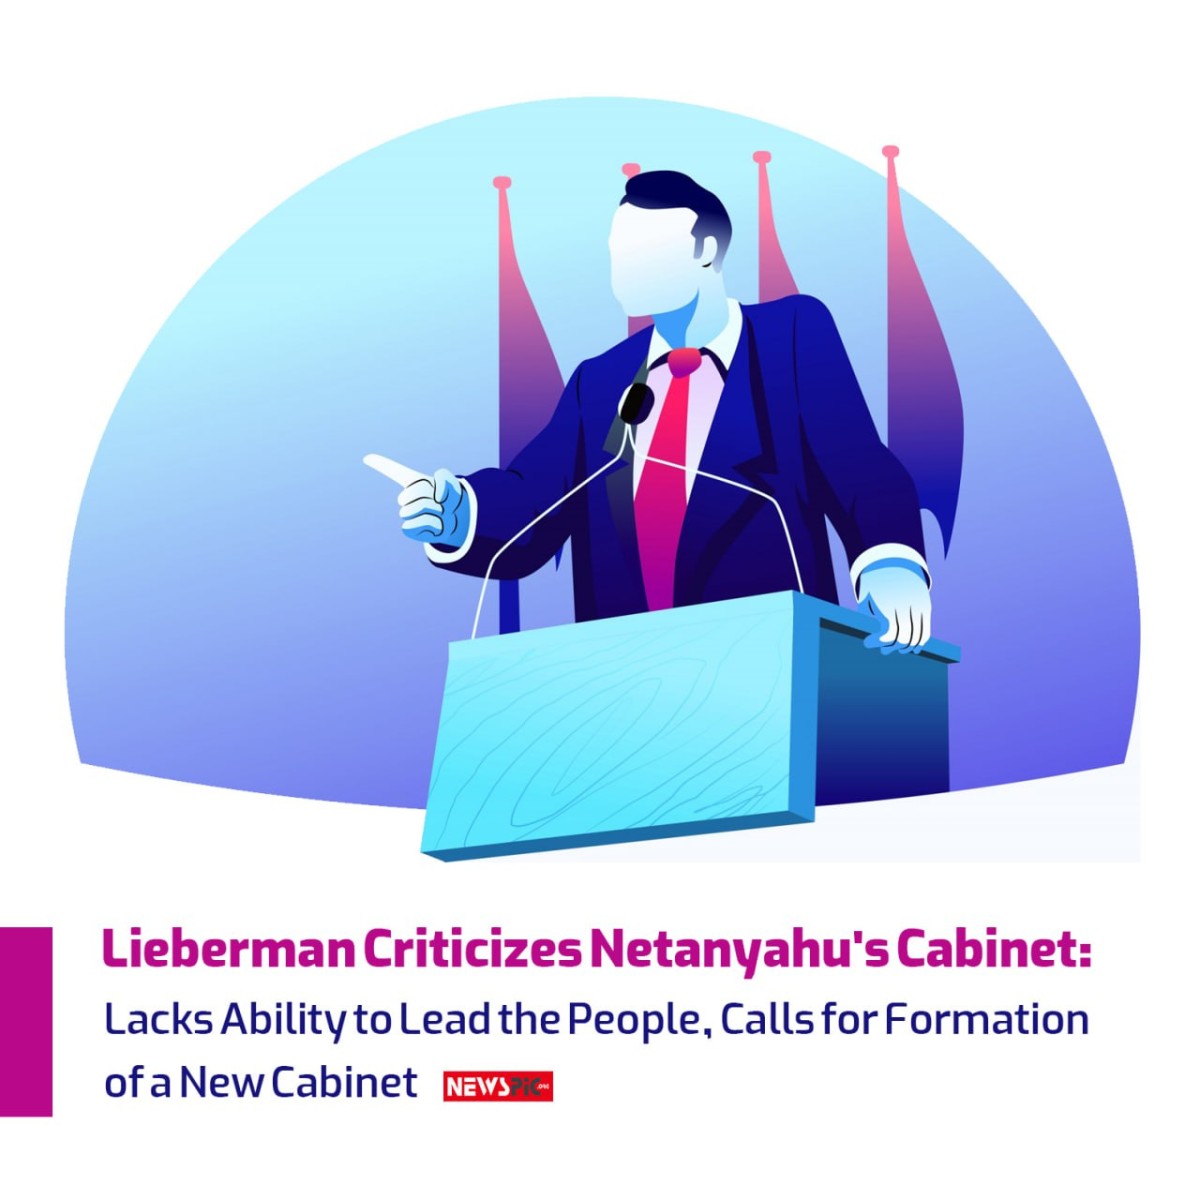 Lieberman Criticizes Netanyahu's Cabinet: Lacks Ability to Lead the People, Calls for Formation of a New Cabinet